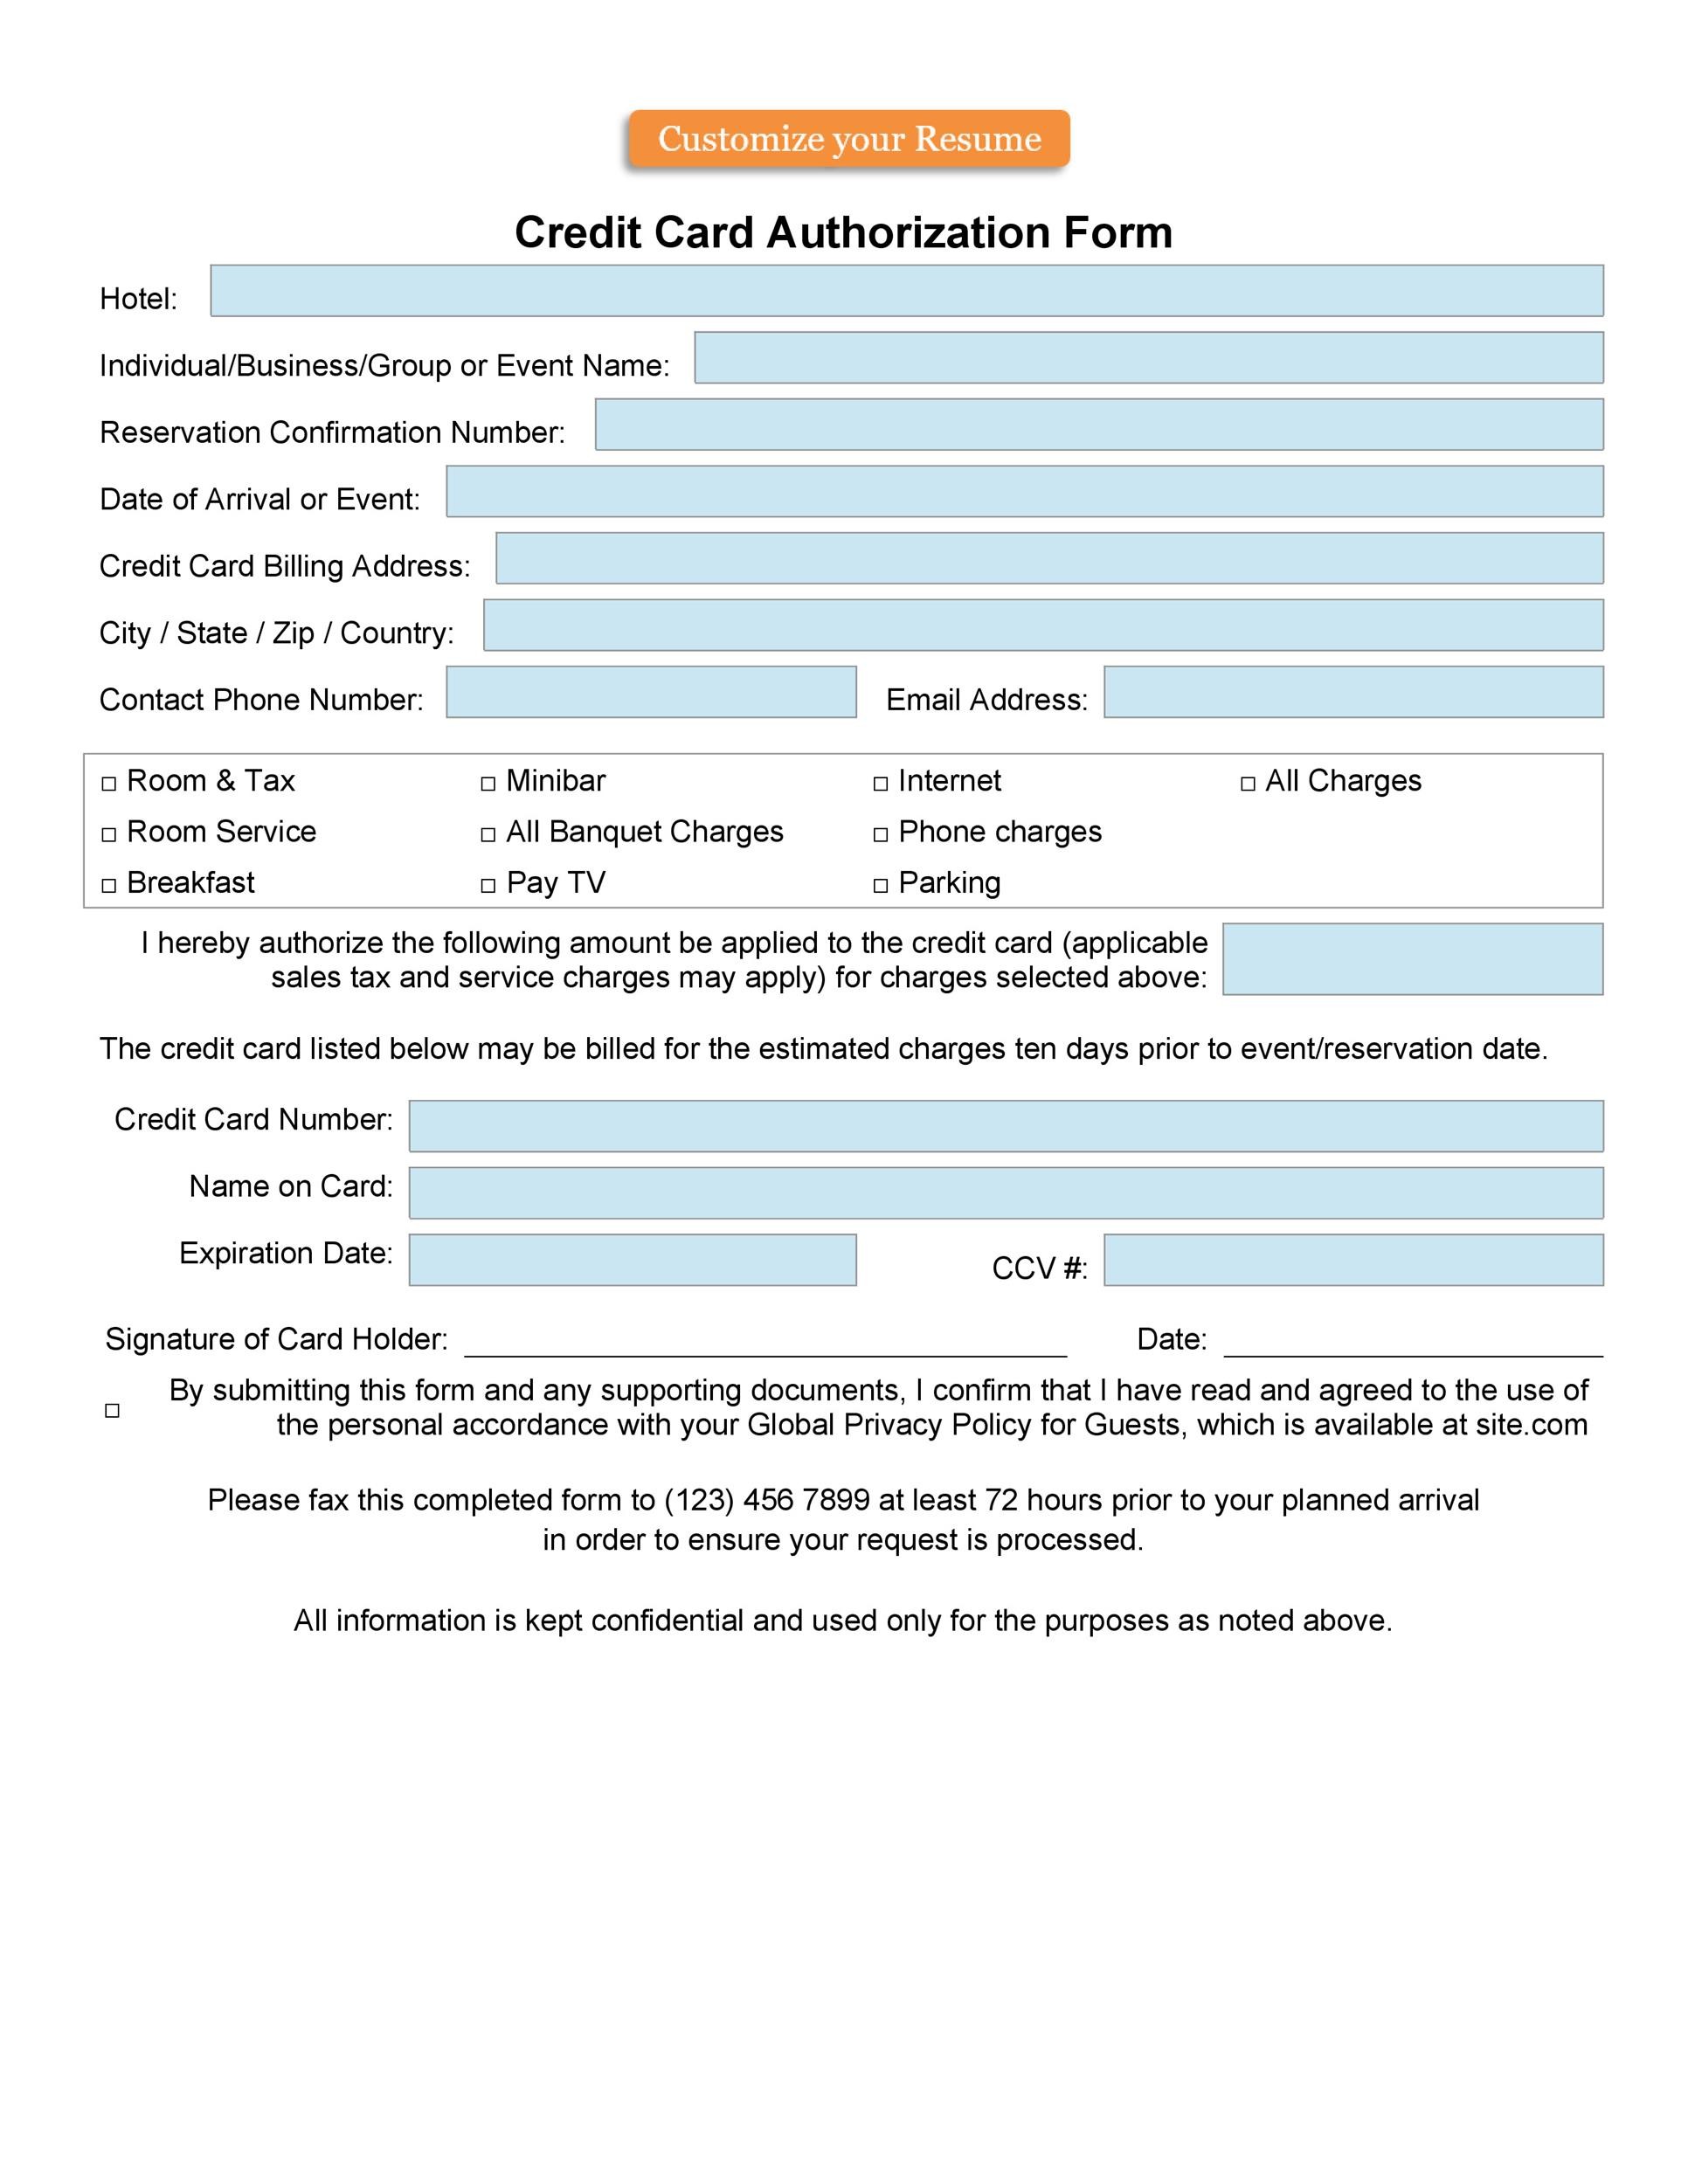 Free credit card authorization form template 35